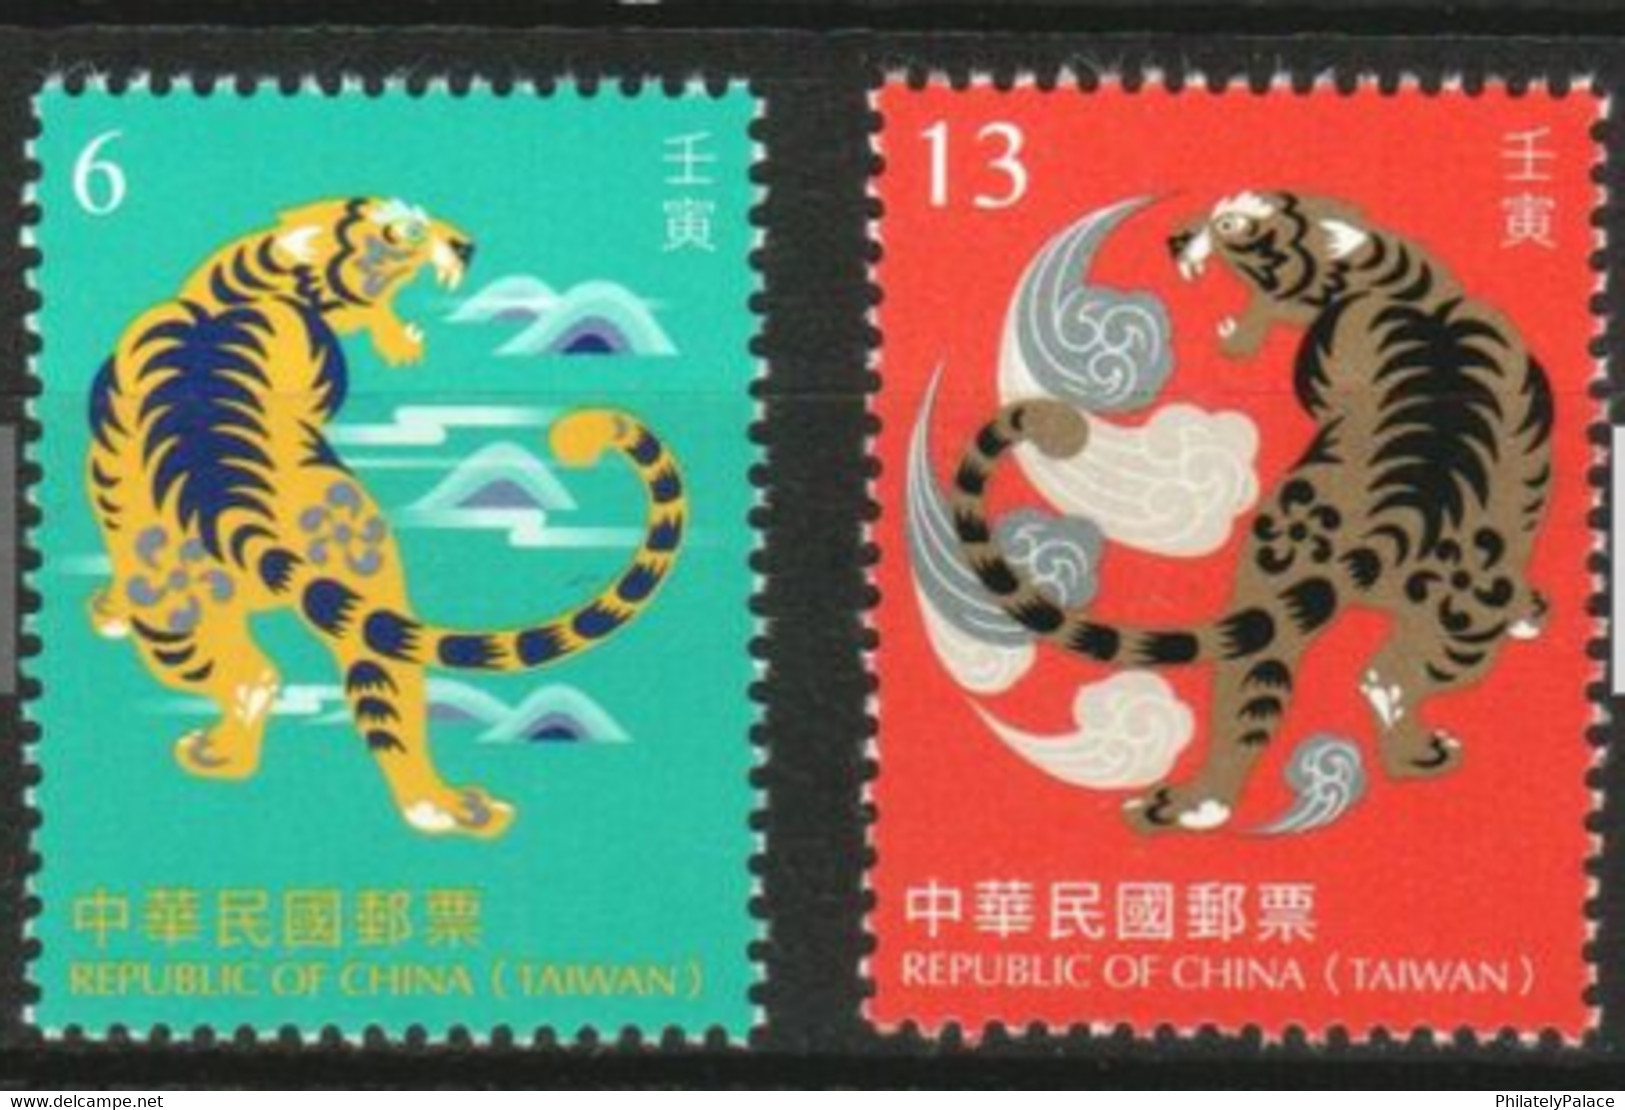 TAIWAN 2021 ZODIAC LUNAR NEW YEAR OF TIGER 2022 COMP. SET 2 STAMPS MNH (**) - Unused Stamps